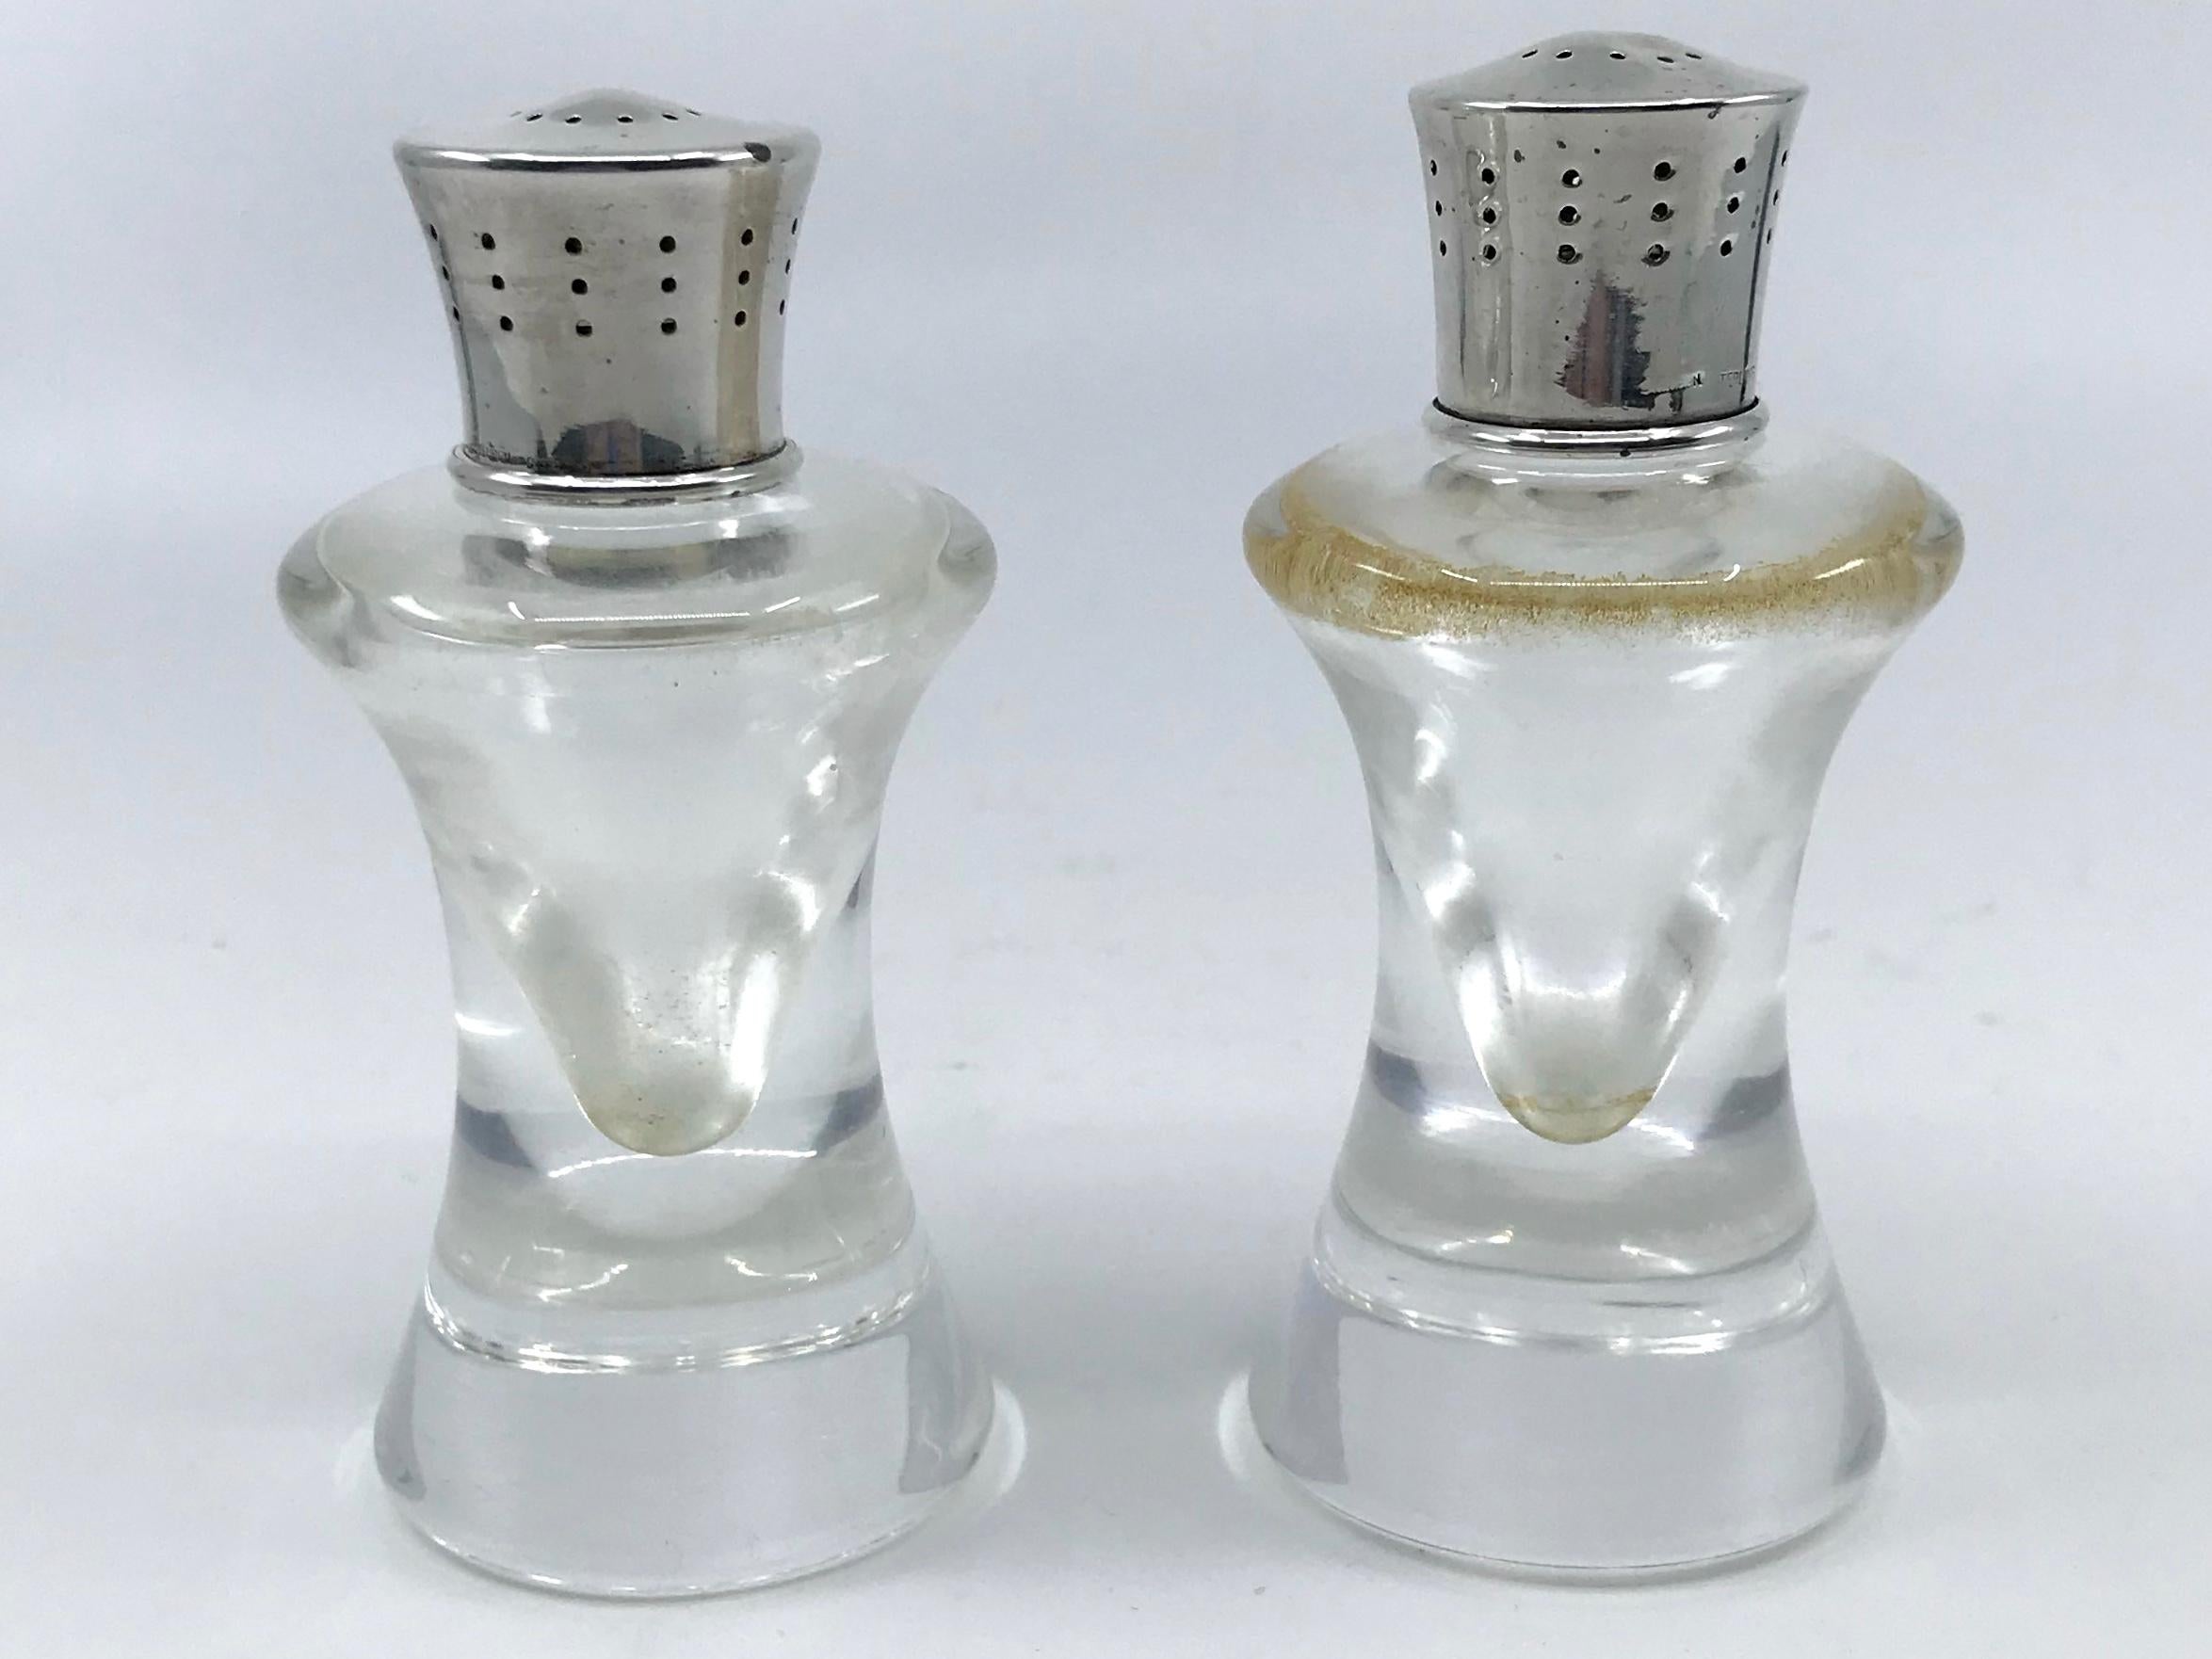 Steuben glass and sterling silver salt & pepper shakers. Pair American heavy crystal hourglass form shakers both signed on verso 